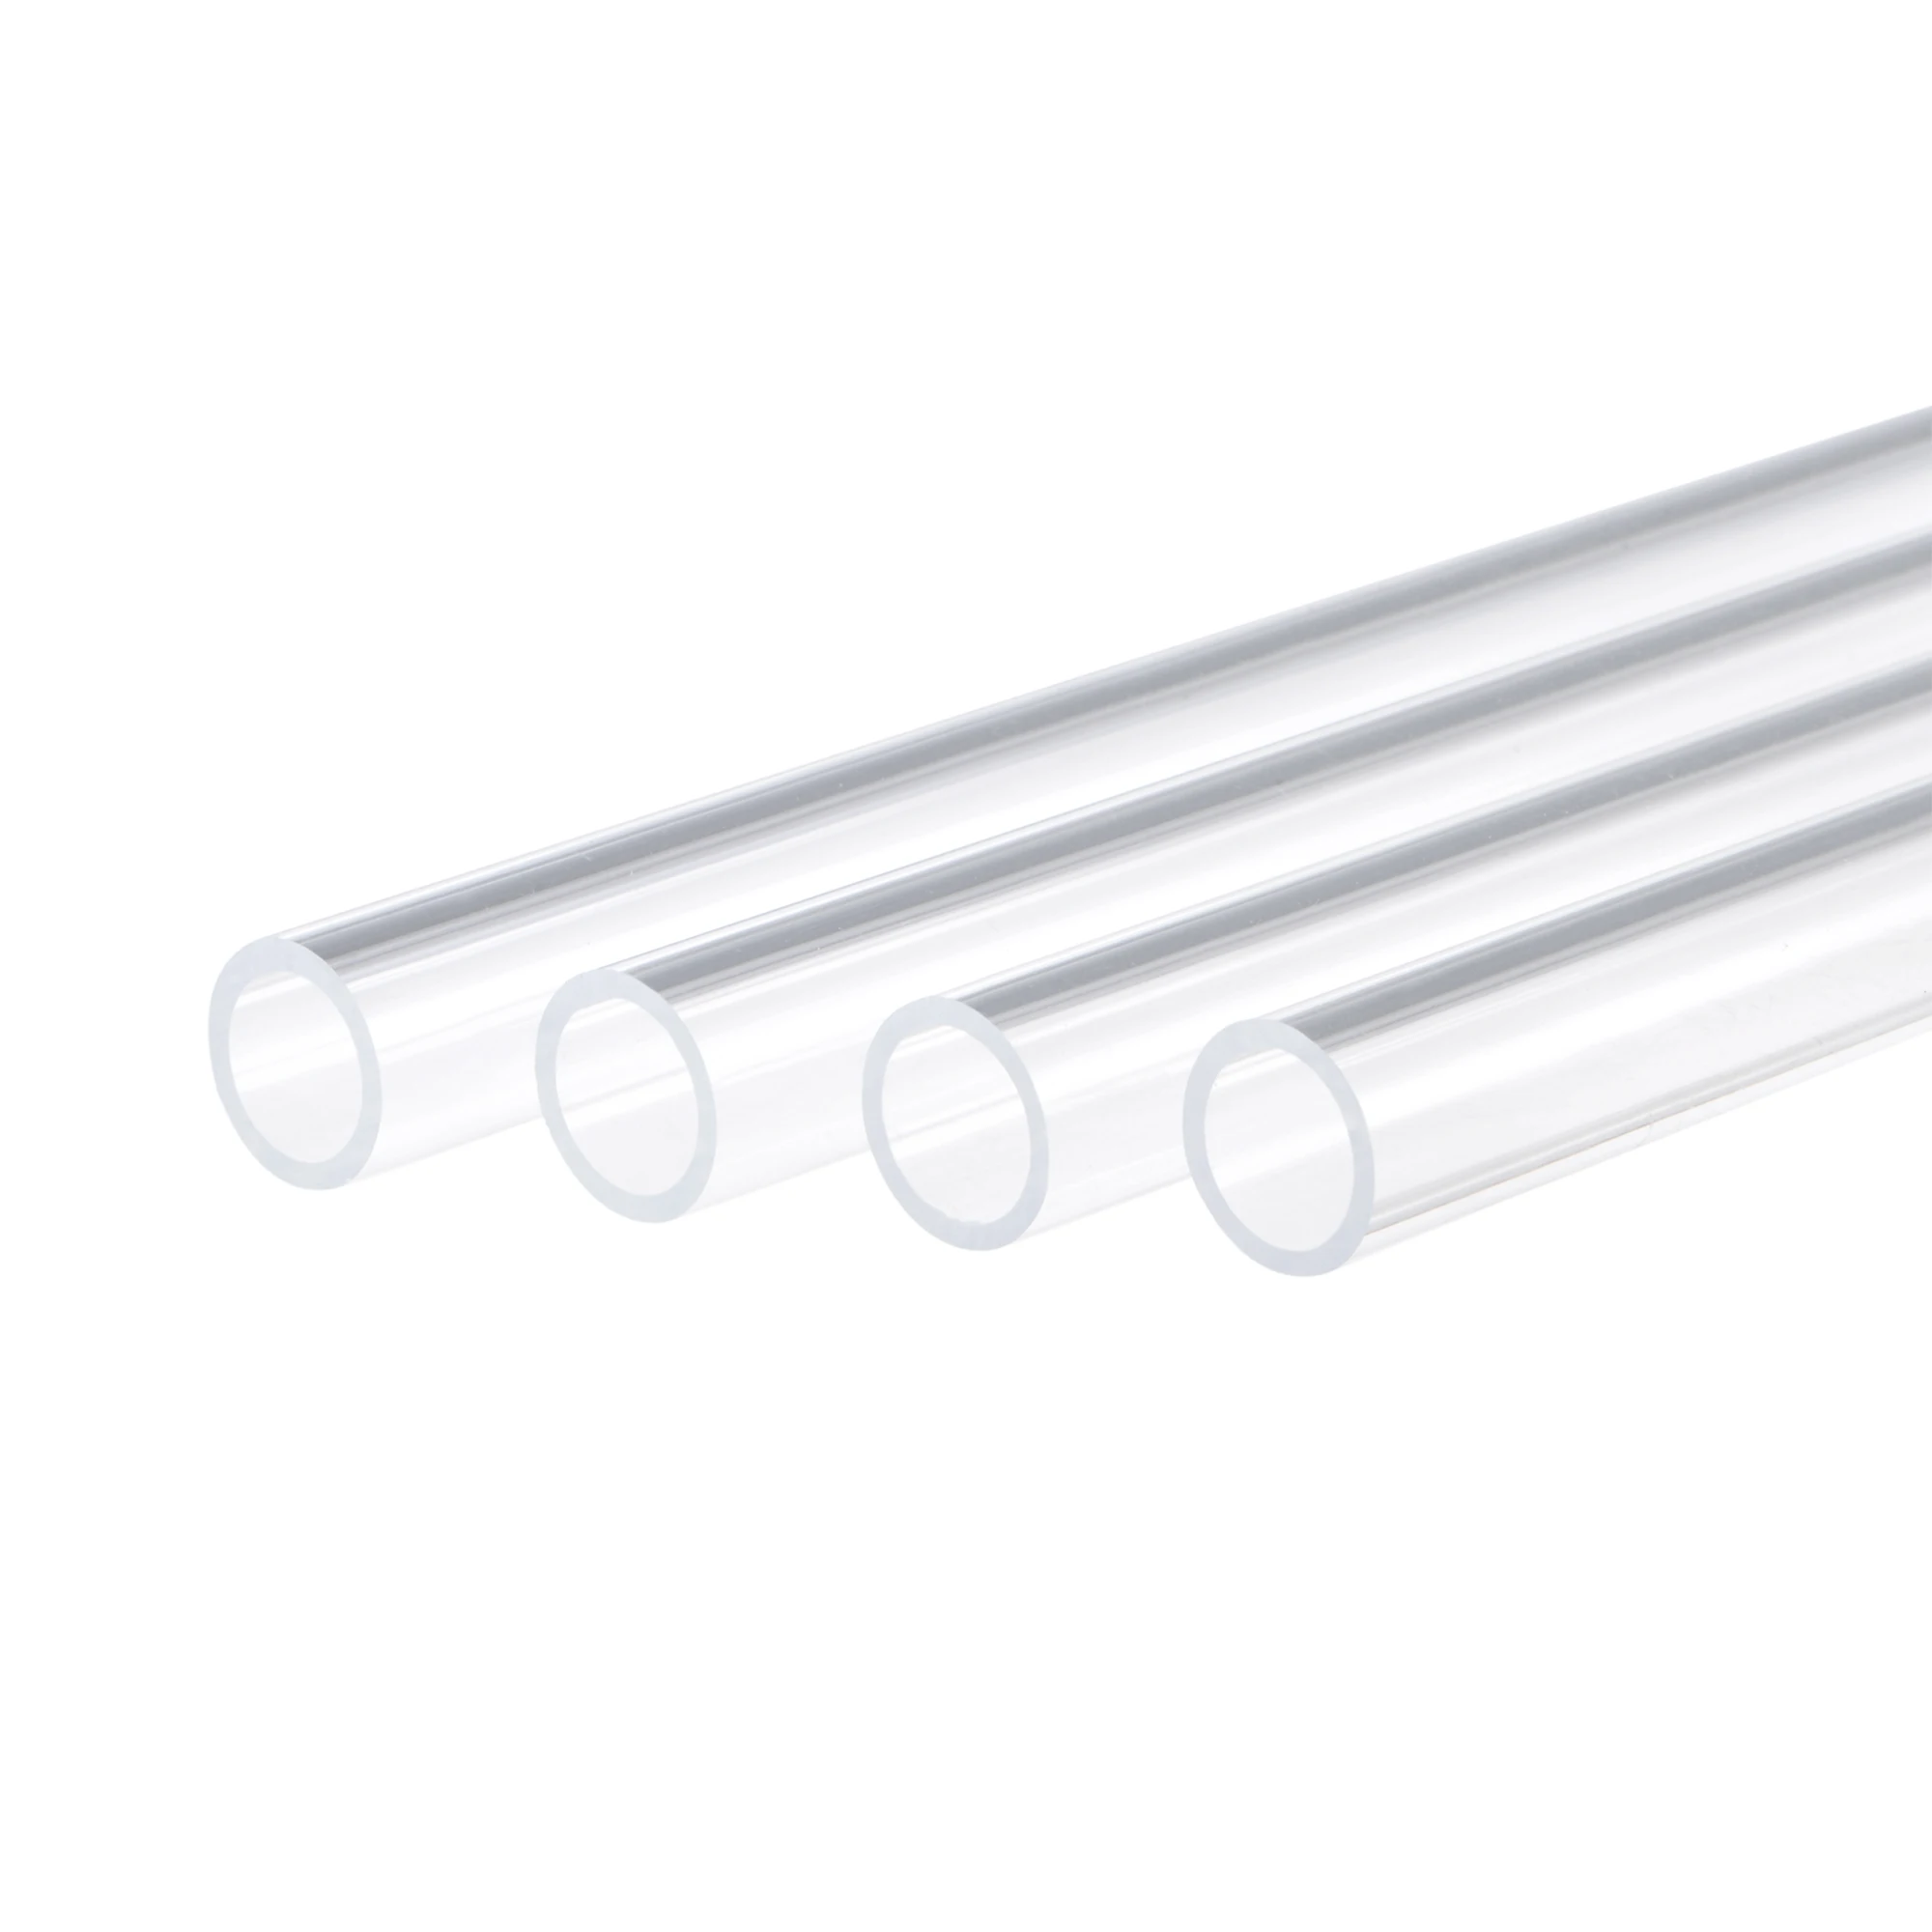 

uxcell Acrylic Pipe Rigid Round Tube Clear 3/8" ID 9/16" OD 3.3ft High Impact for Lighting, Models, Plumbing, Crafts 4 Pack